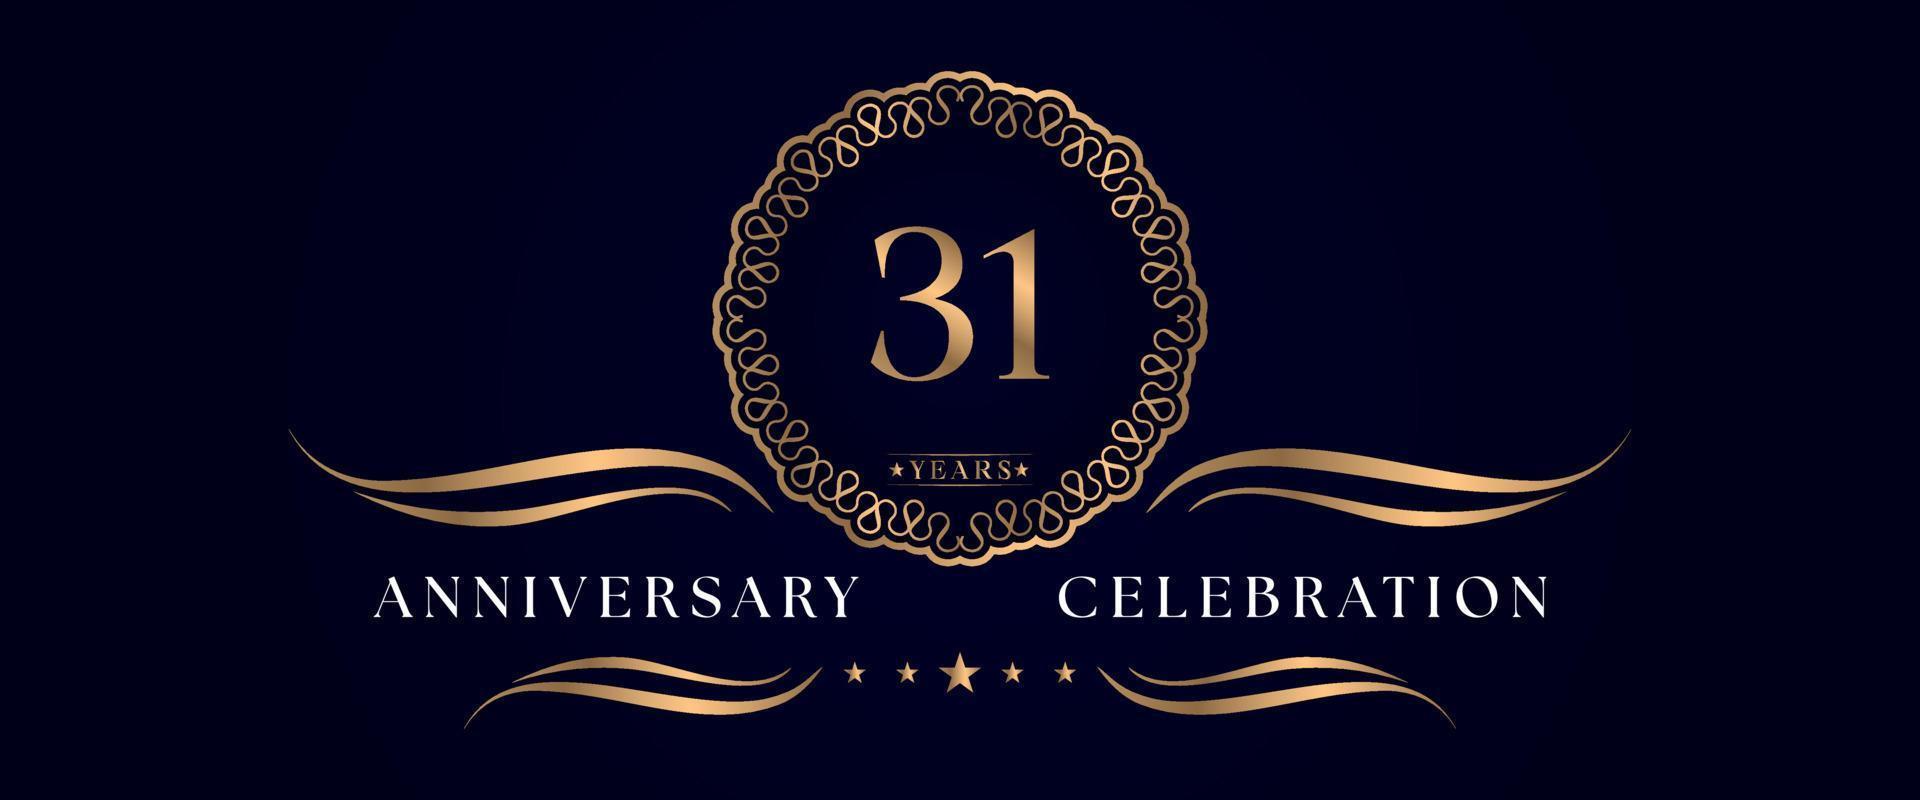 31 years anniversary celebration with elegant circle frame isolated on dark blue background. Vector design for greeting card, birthday party, wedding, event party, ceremony. 31 years Anniversary logo.